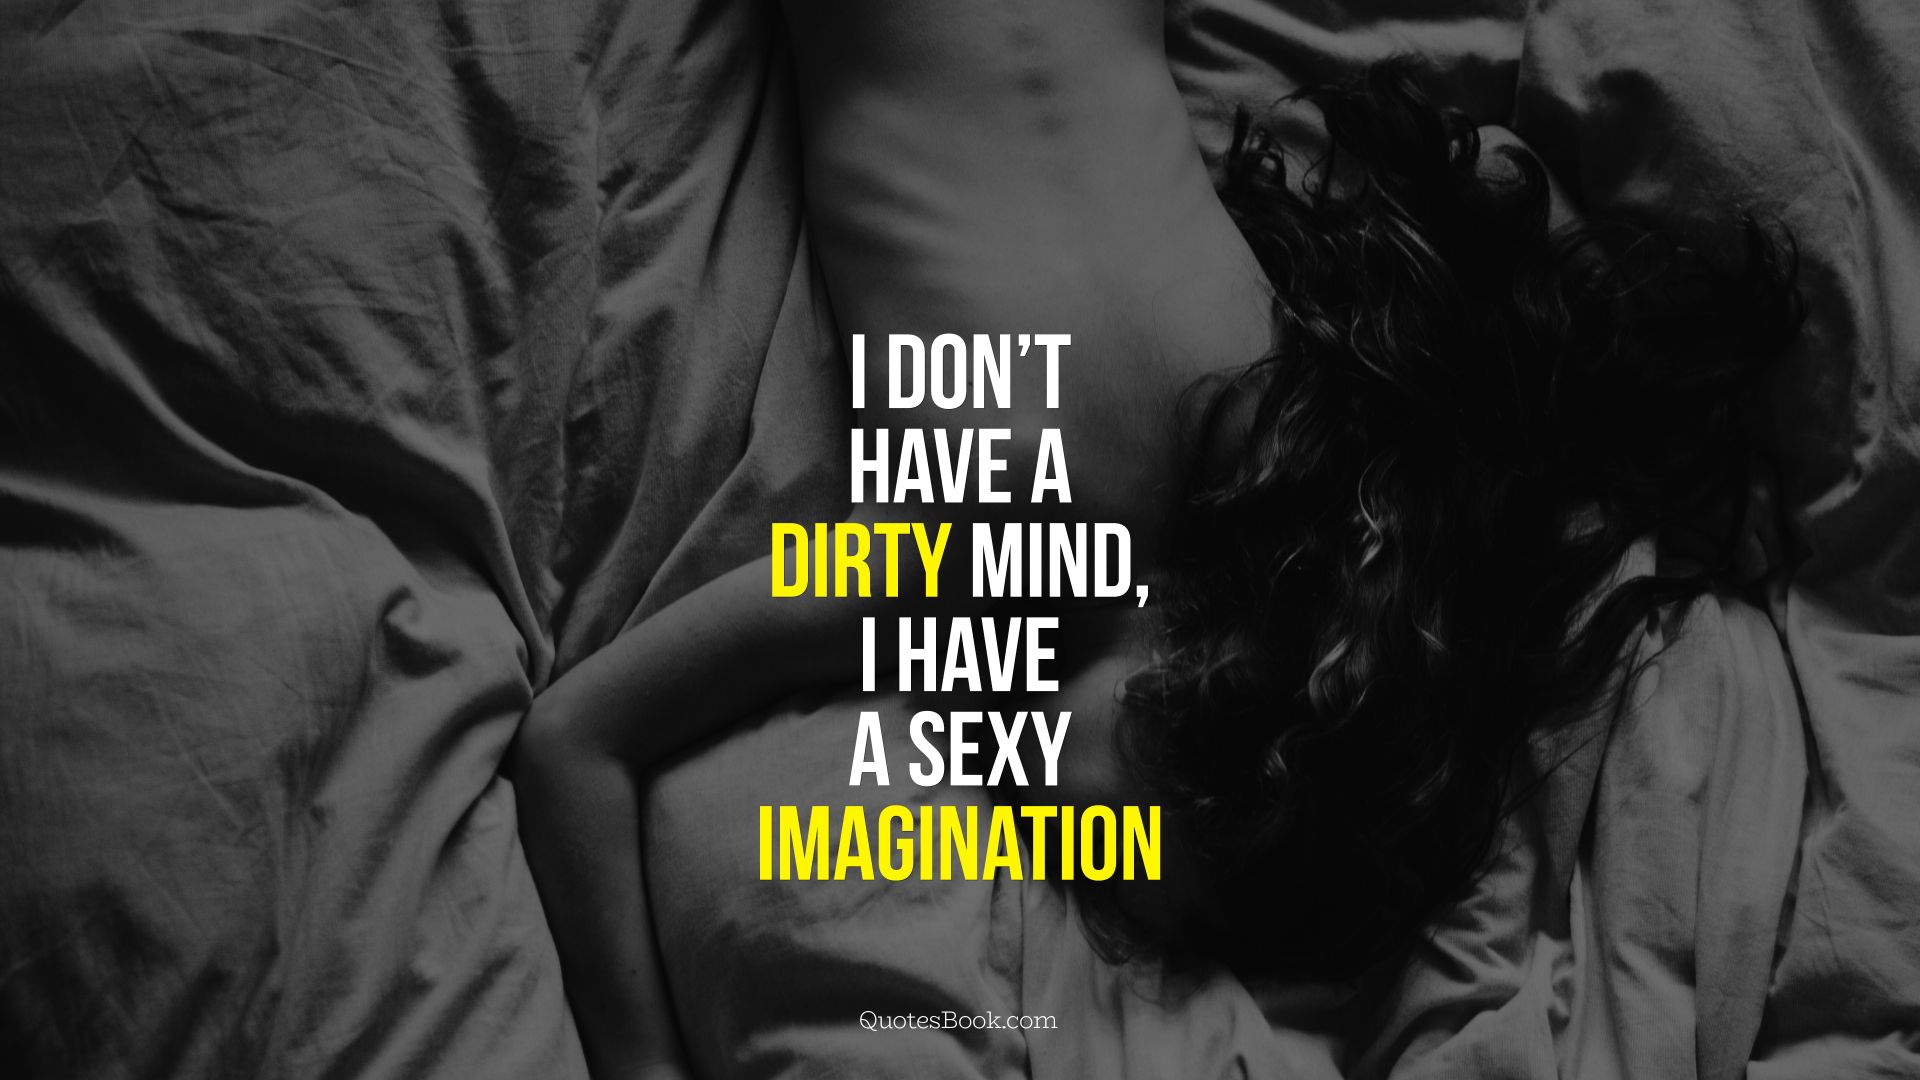 I don't have a dirty mind, I have sexy imagination.